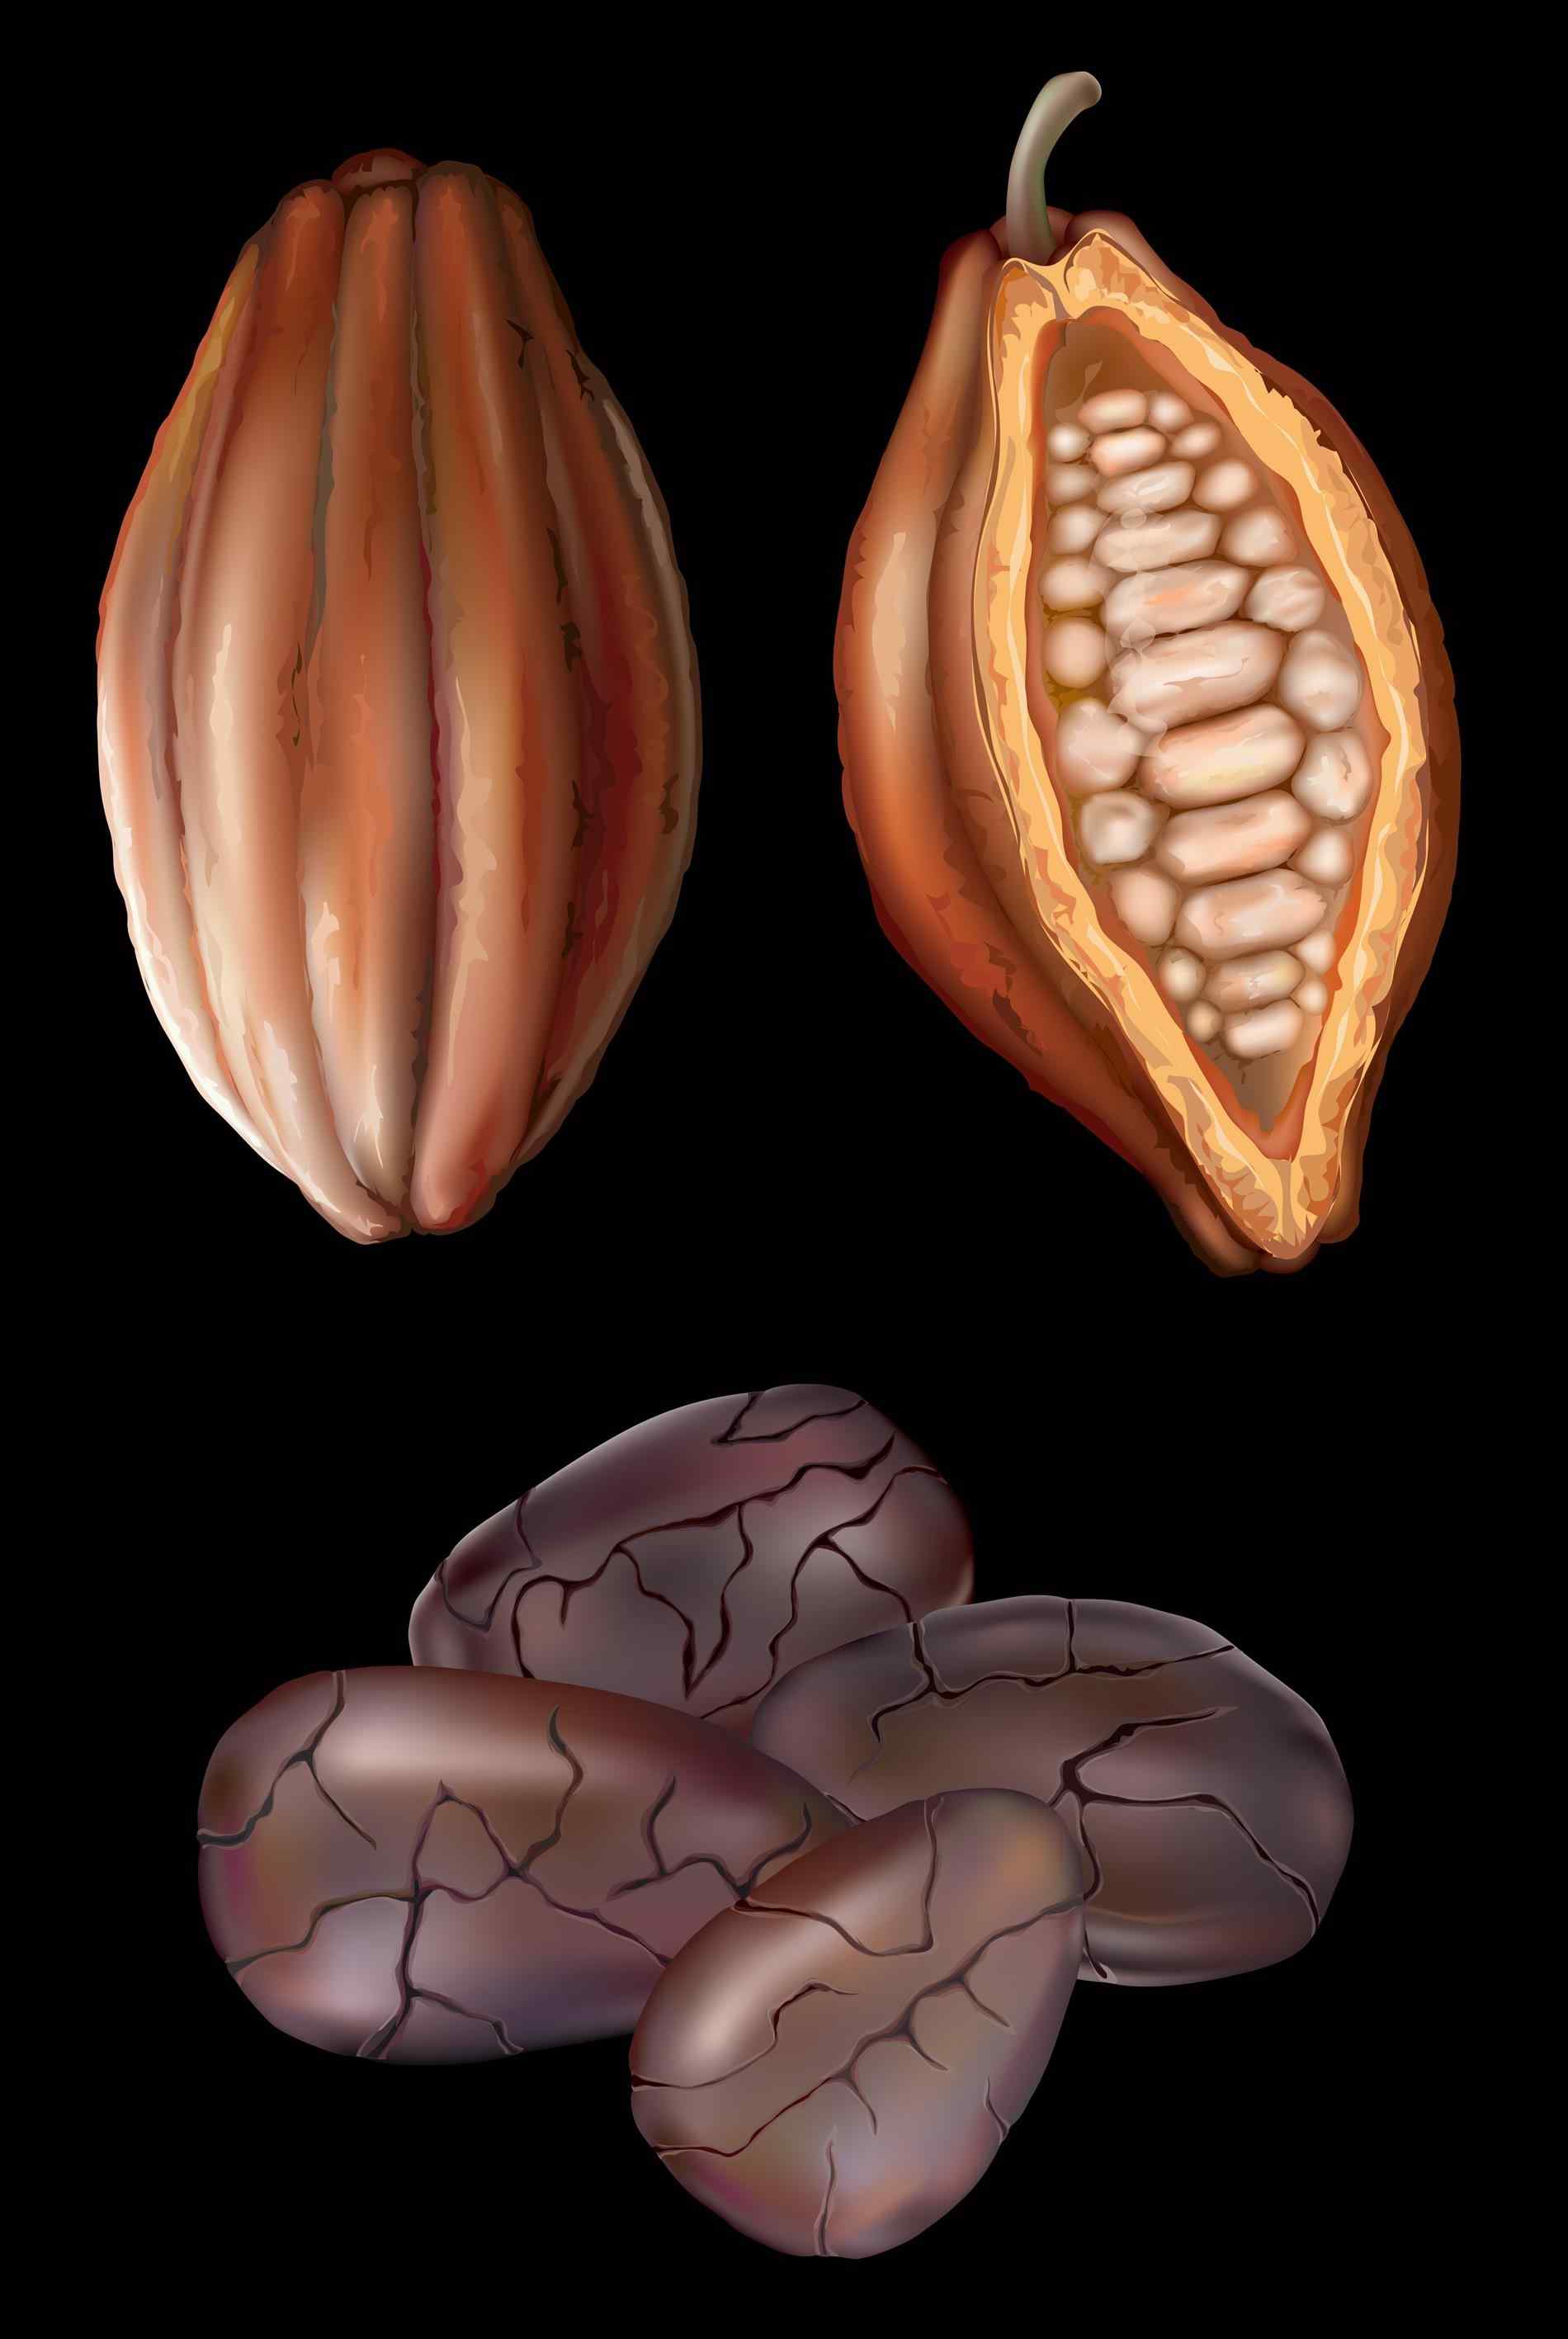 The images collection of. Beans clipart nuts